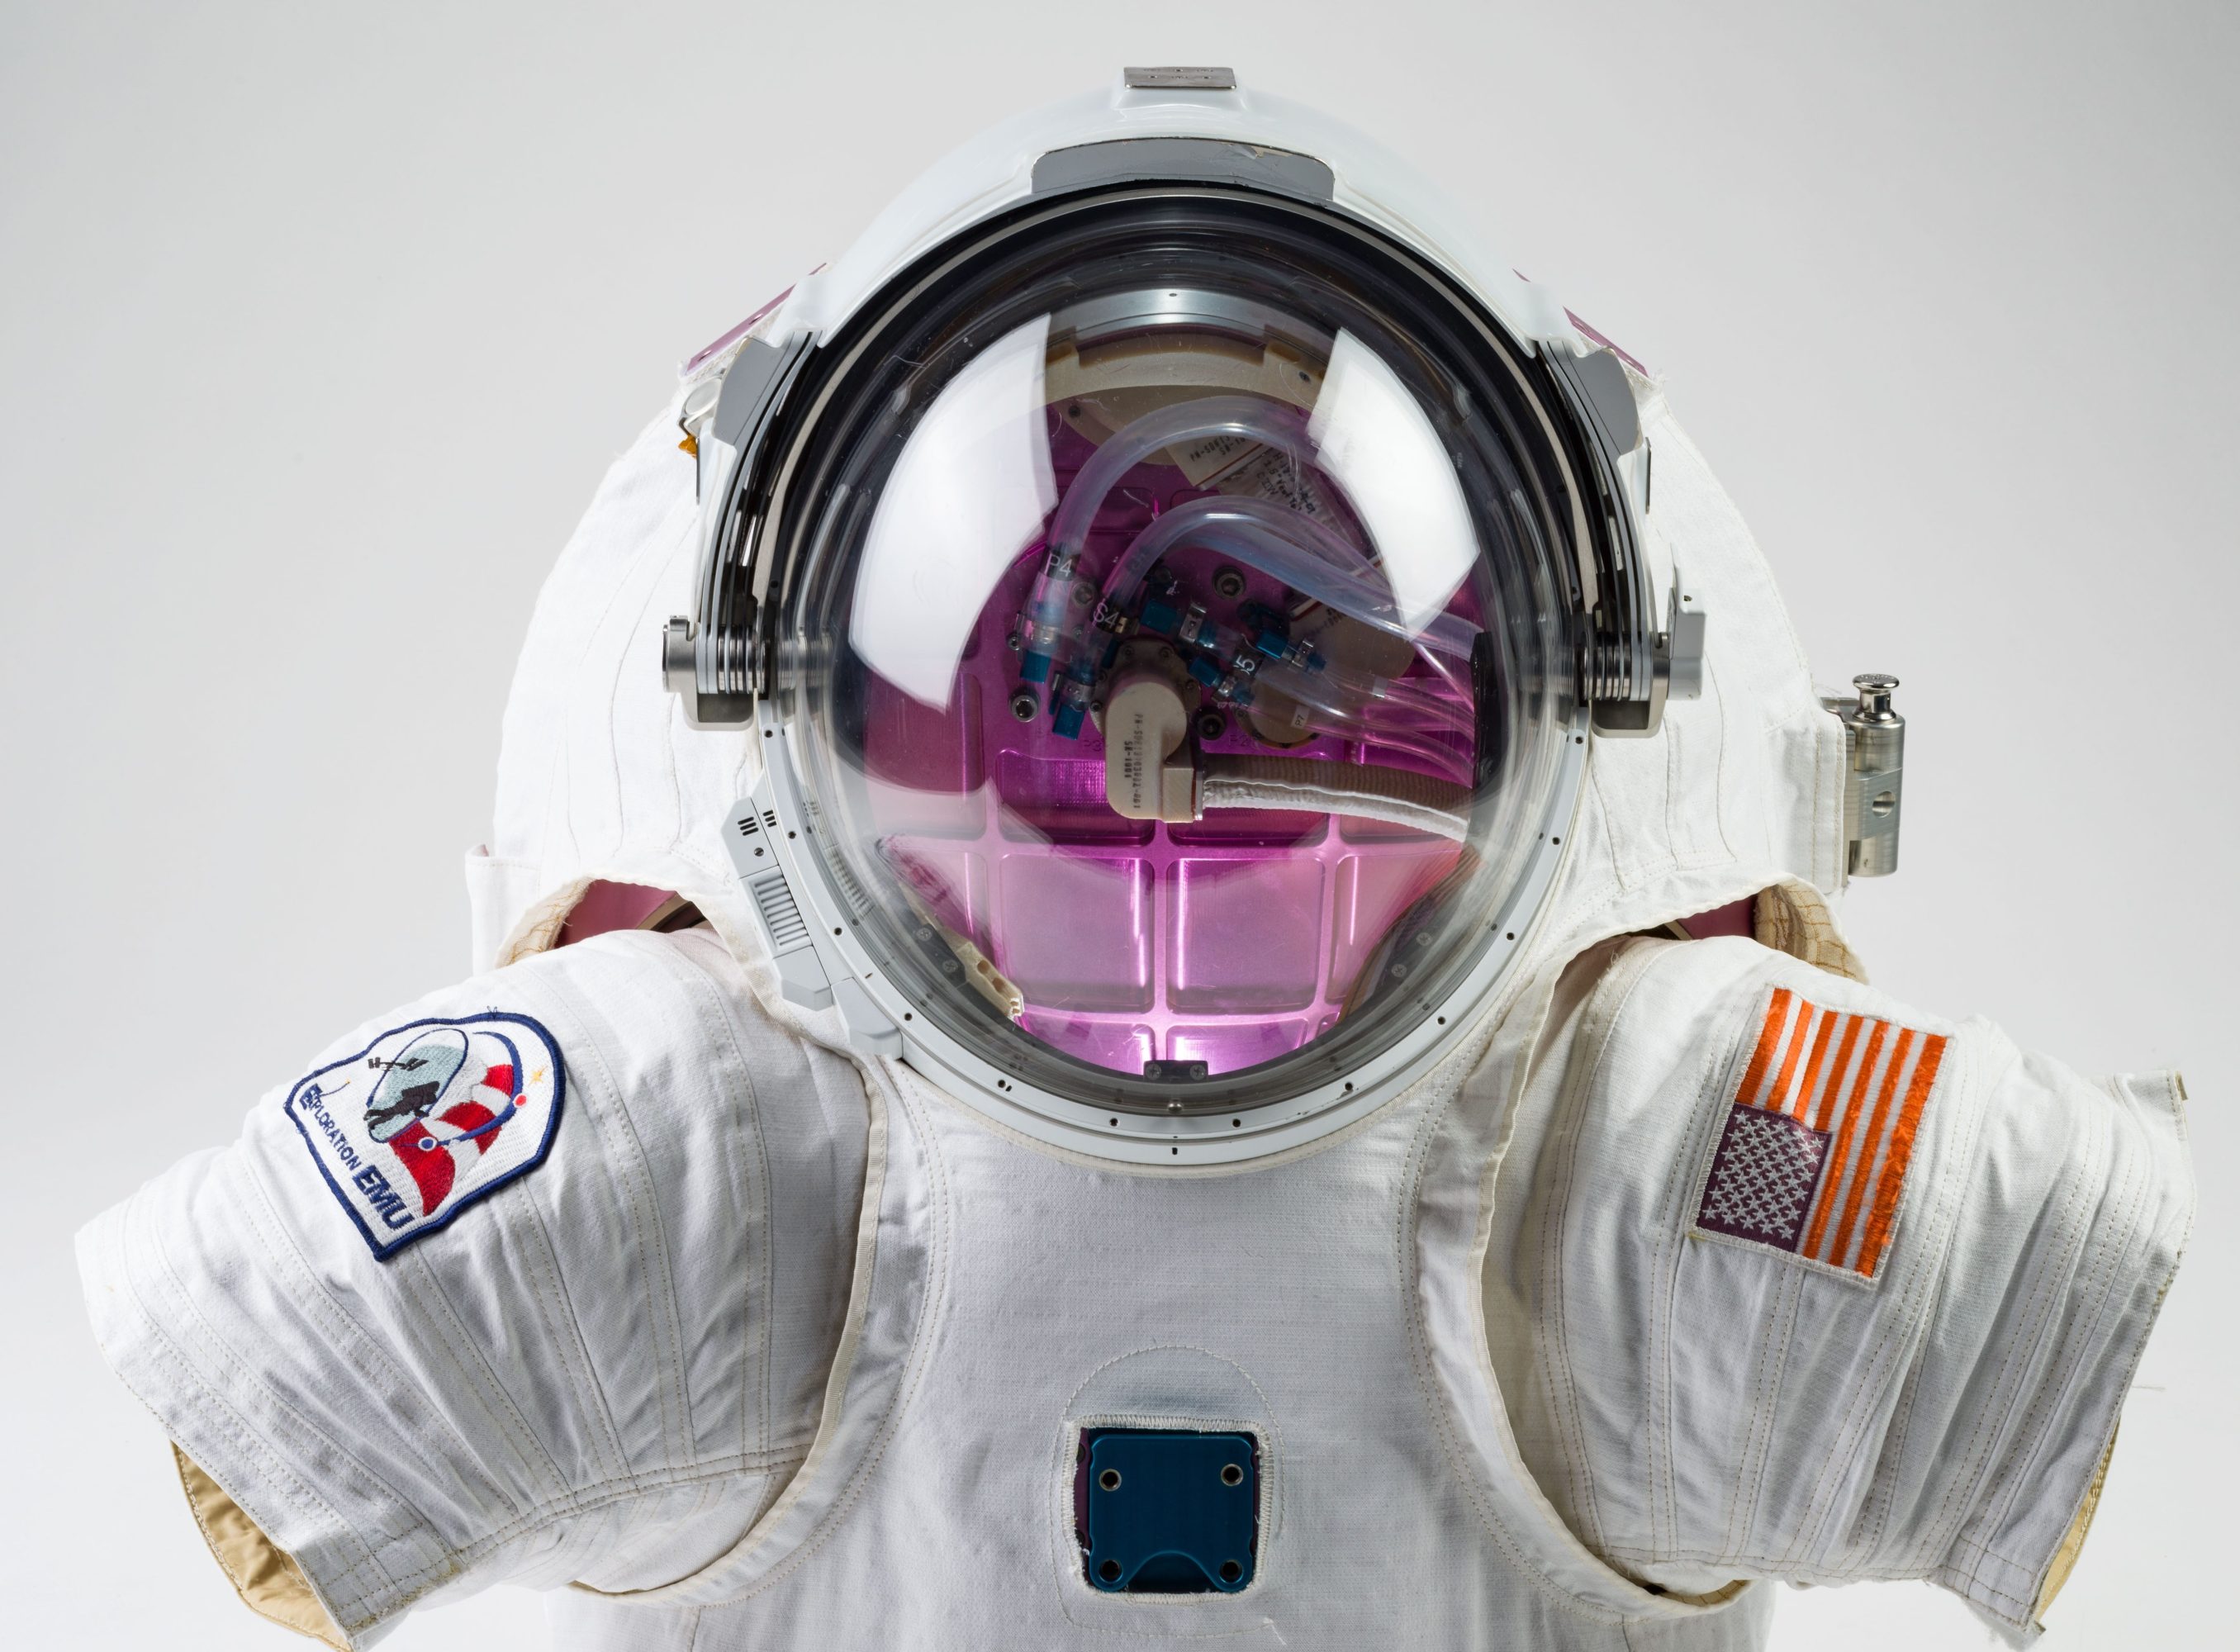 Current spacesuits won't cut it on the moon. So NASA made new ones